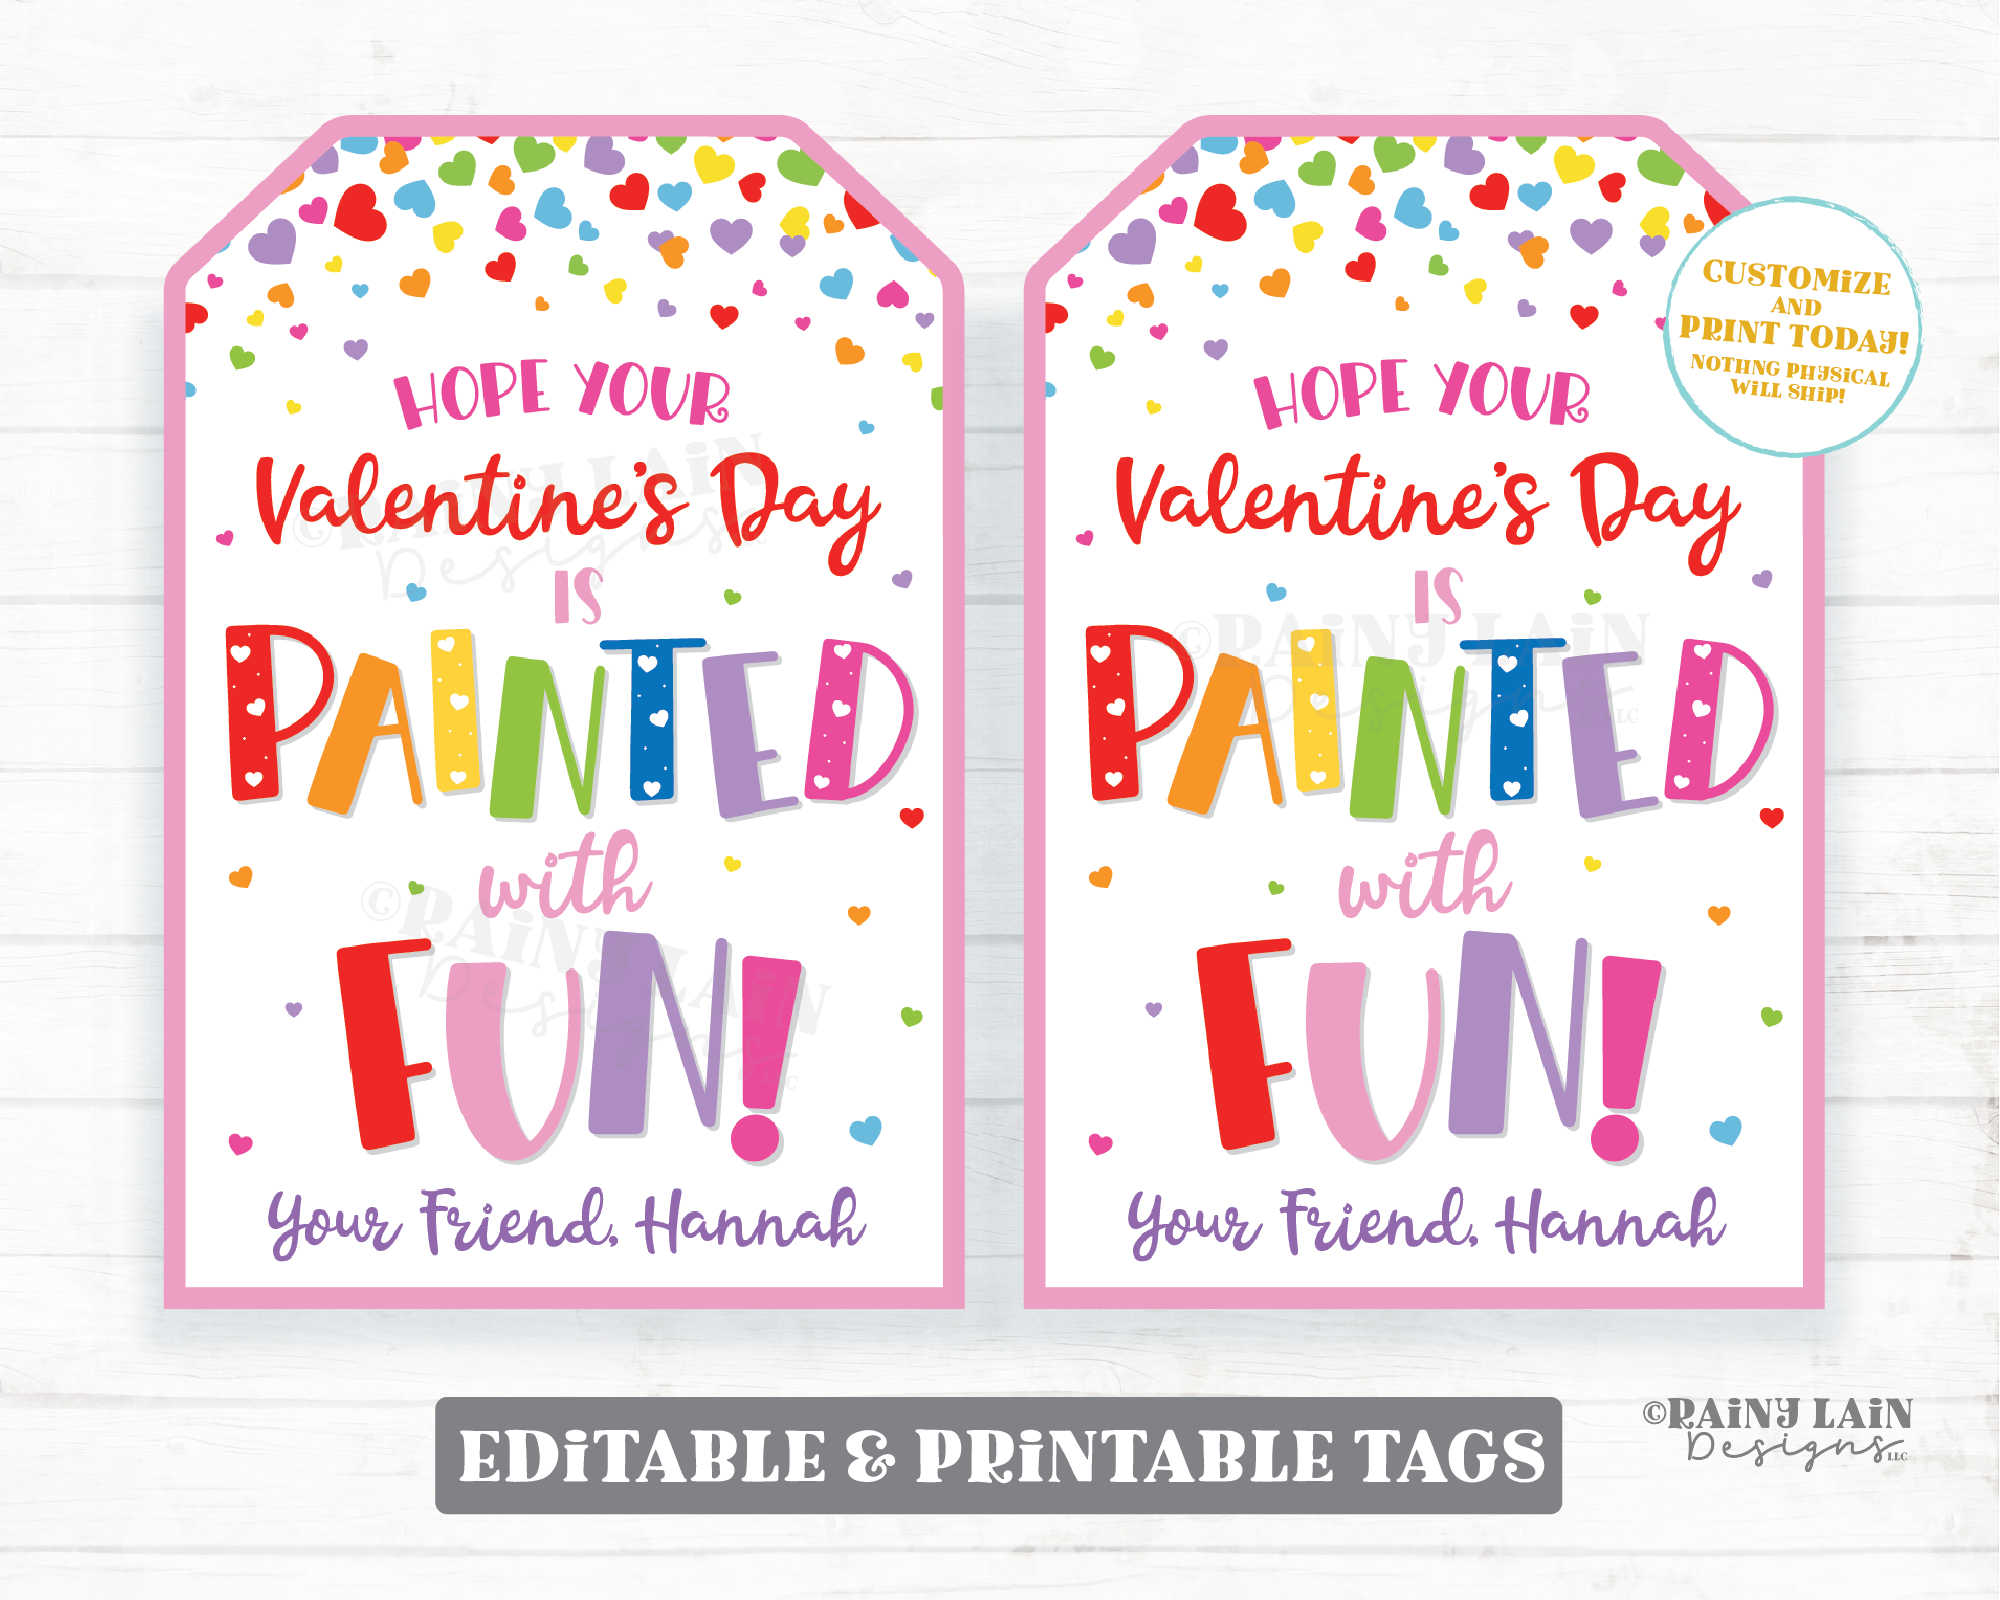 Painted with Fun Valentine Tag Paint Brush Valentine's Day Gift Painting Palette Art Preschool Classroom Non-Candy Printable Editable Tag